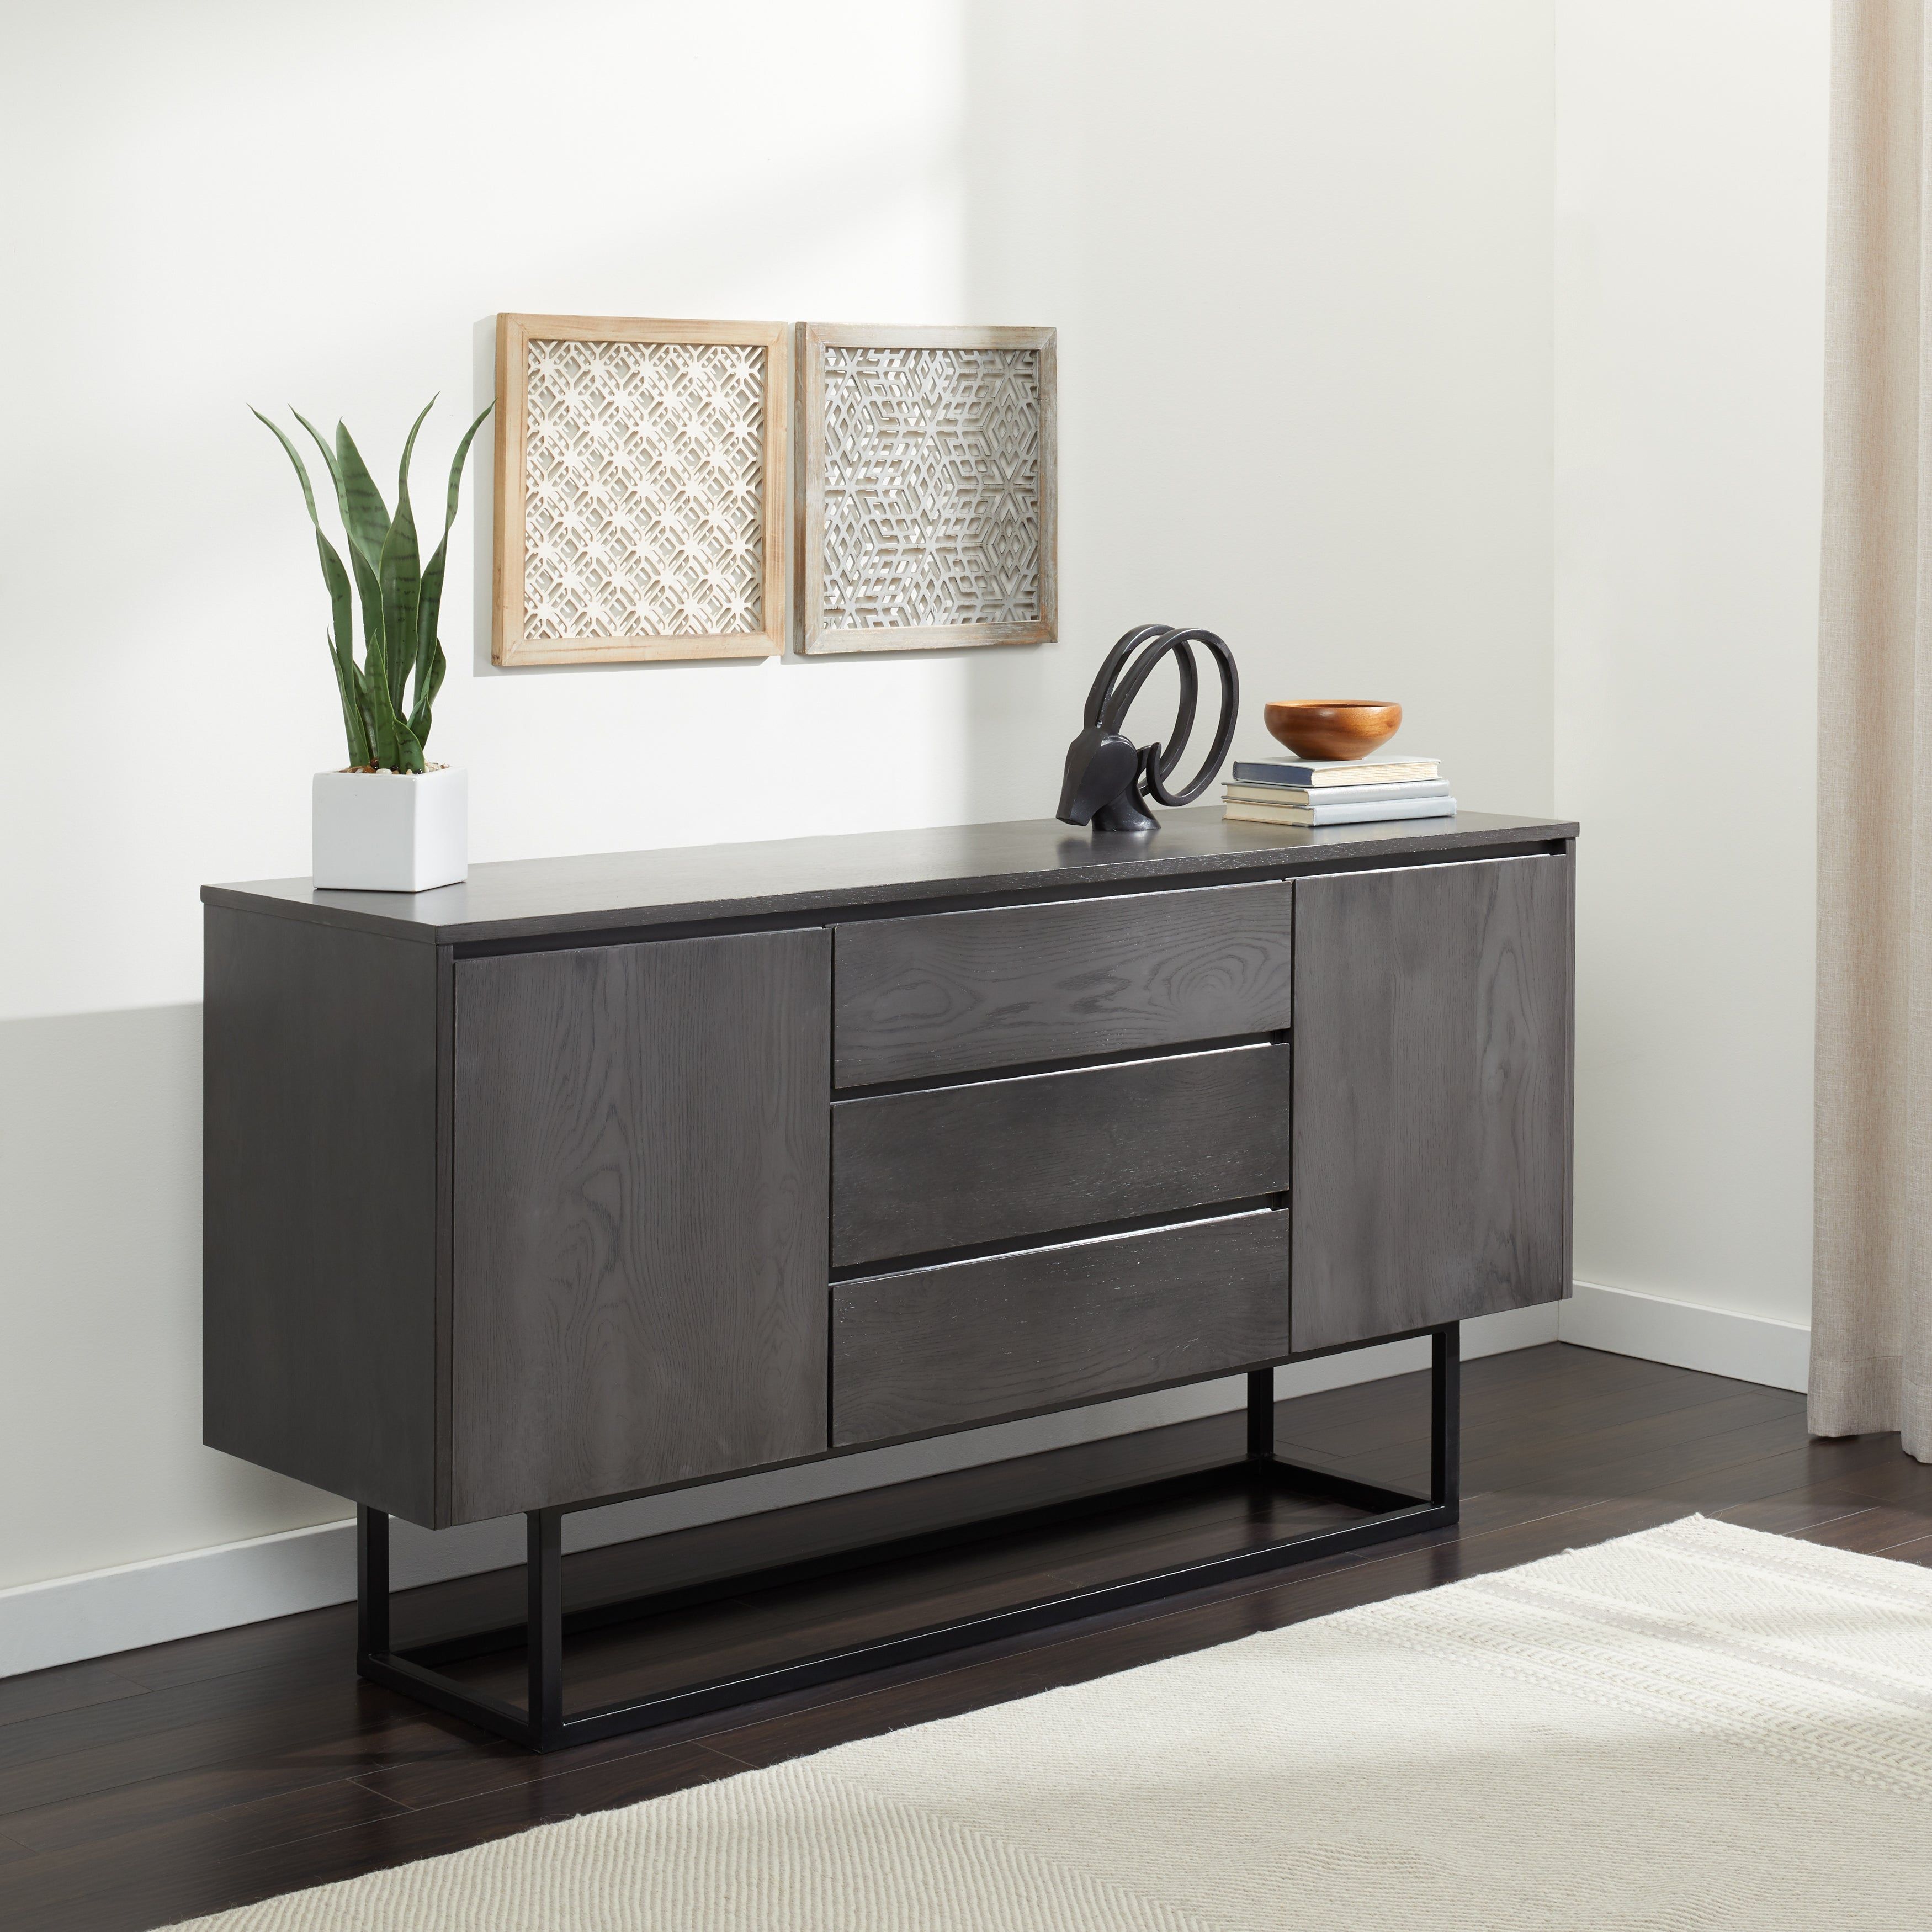 Stone And Stripes Taylor 2 Door 3 Drawer Charcoal Box Buffet In Modern Lacquer 2 Door 3 Drawer Buffets (View 13 of 30)